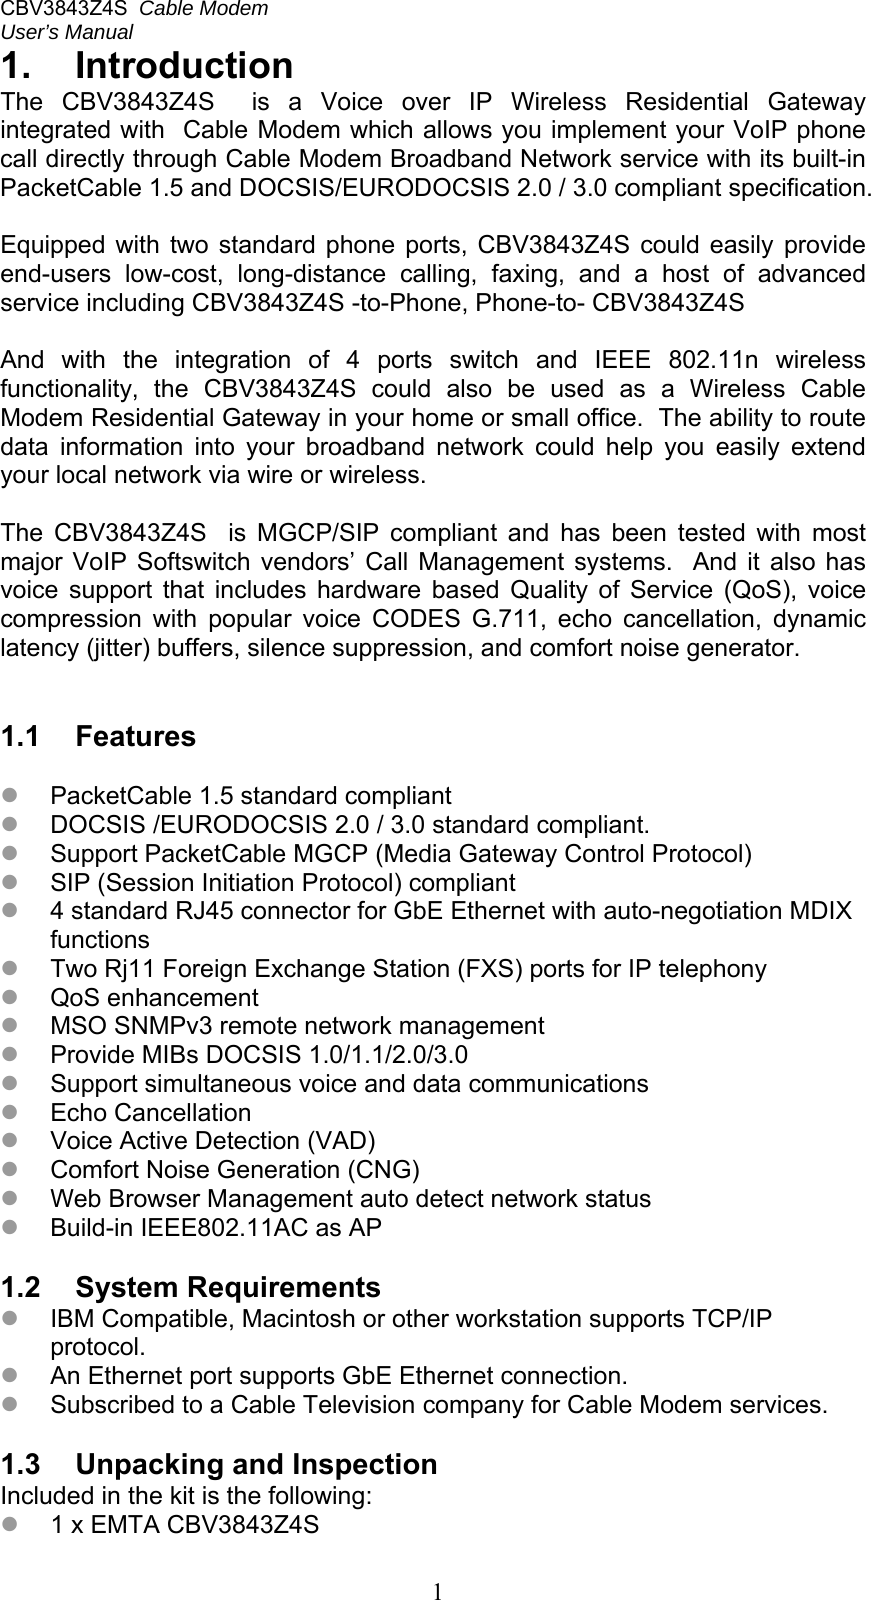 CBV3843Z4S  Cable Modem  User’s Manual   11.  Introduction The  CBV3843Z4S    is  a  Voice  over  IP  Wireless  Residential  Gateway integrated with  Cable Modem which allows you implement your VoIP phone call directly through Cable Modem Broadband Network service with its built-in PacketCable 1.5 and DOCSIS/EURODOCSIS 2.0 / 3.0 compliant specification.  Equipped  with  two  standard  phone  ports,  CBV3843Z4S  could  easily provide end-users  low-cost,  long-distance  calling,  faxing,  and  a  host  of  advanced service including CBV3843Z4S -to-Phone, Phone-to- CBV3843Z4S  And  with  the  integration  of  4  ports  switch  and  IEEE  802.11n  wireless functionality,  the  CBV3843Z4S  could  also  be  used  as  a  Wireless  Cable Modem Residential Gateway in your home or small office.  The ability to route data  information  into  your  broadband  network  could  help  you  easily  extend your local network via wire or wireless.  The  CBV3843Z4S    is  MGCP/SIP  compliant  and  has  been  tested  with  most major  VoIP  Softswitch  vendors’  Call  Management  systems.    And  it also has voice  support  that  includes  hardware  based  Quality  of  Service  (QoS),  voice compression  with  popular  voice  CODES  G.711,  echo  cancellation,  dynamic latency (jitter) buffers, silence suppression, and comfort noise generator.   1.1  Features   PacketCable 1.5 standard compliant  DOCSIS /EURODOCSIS 2.0 / 3.0 standard compliant.  Support PacketCable MGCP (Media Gateway Control Protocol)  SIP (Session Initiation Protocol) compliant  4 standard RJ45 connector for GbE Ethernet with auto-negotiation MDIX functions  Two Rj11 Foreign Exchange Station (FXS) ports for IP telephony  QoS enhancement  MSO SNMPv3 remote network management  Provide MIBs DOCSIS 1.0/1.1/2.0/3.0  Support simultaneous voice and data communications  Echo Cancellation  Voice Active Detection (VAD)  Comfort Noise Generation (CNG)  Web Browser Management auto detect network status  Build-in IEEE802.11AC as AP   1.2  System Requirements  IBM Compatible, Macintosh or other workstation supports TCP/IP protocol.  An Ethernet port supports GbE Ethernet connection.  Subscribed to a Cable Television company for Cable Modem services.  1.3  Unpacking and Inspection Included in the kit is the following:  1 x EMTA CBV3843Z4S 